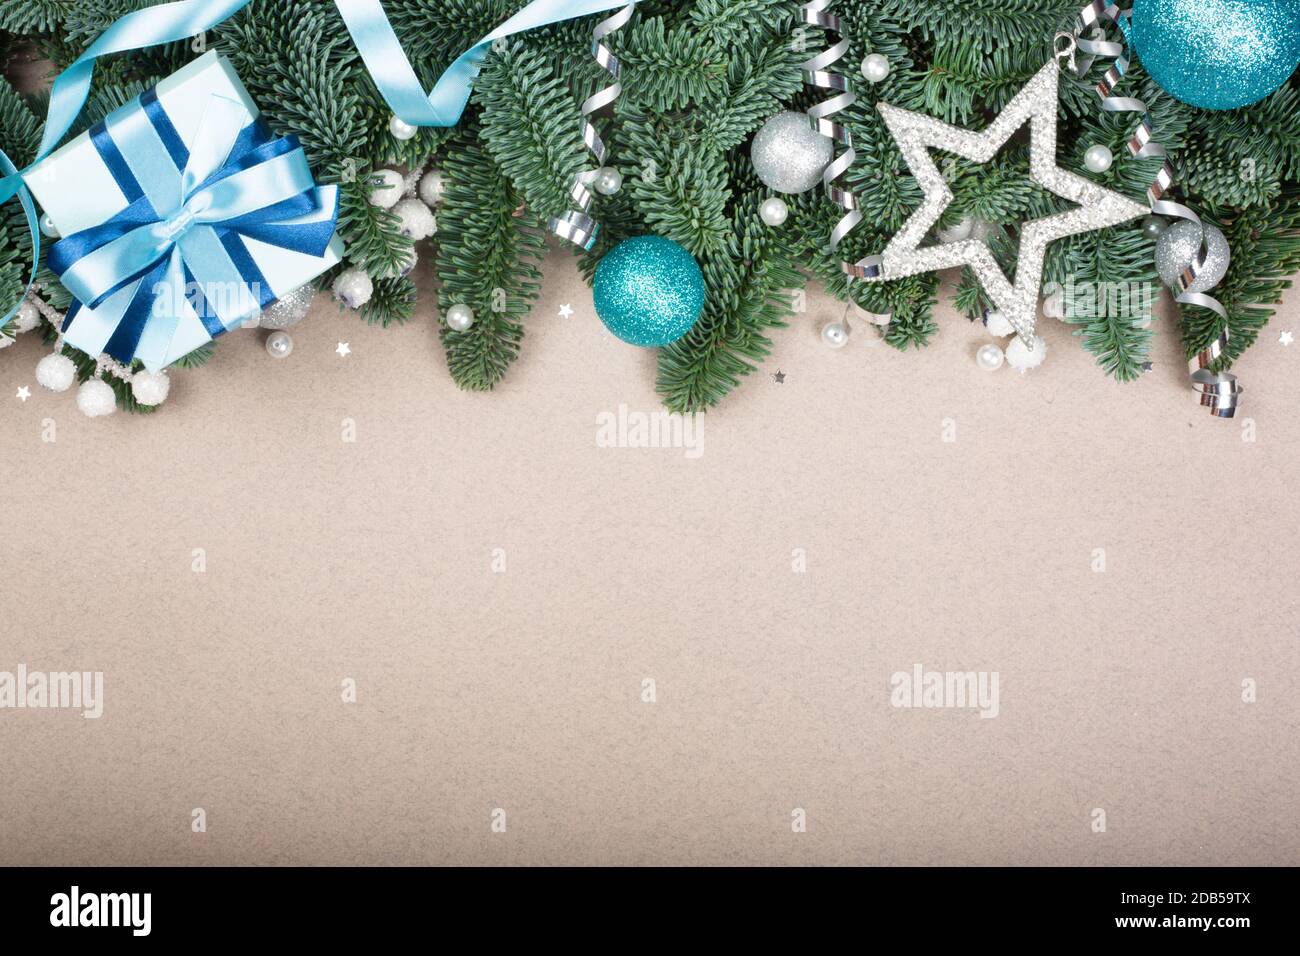 Christmas noble fir tree twigs gift and decorations on brown paper background with copy space for text Stock Photo